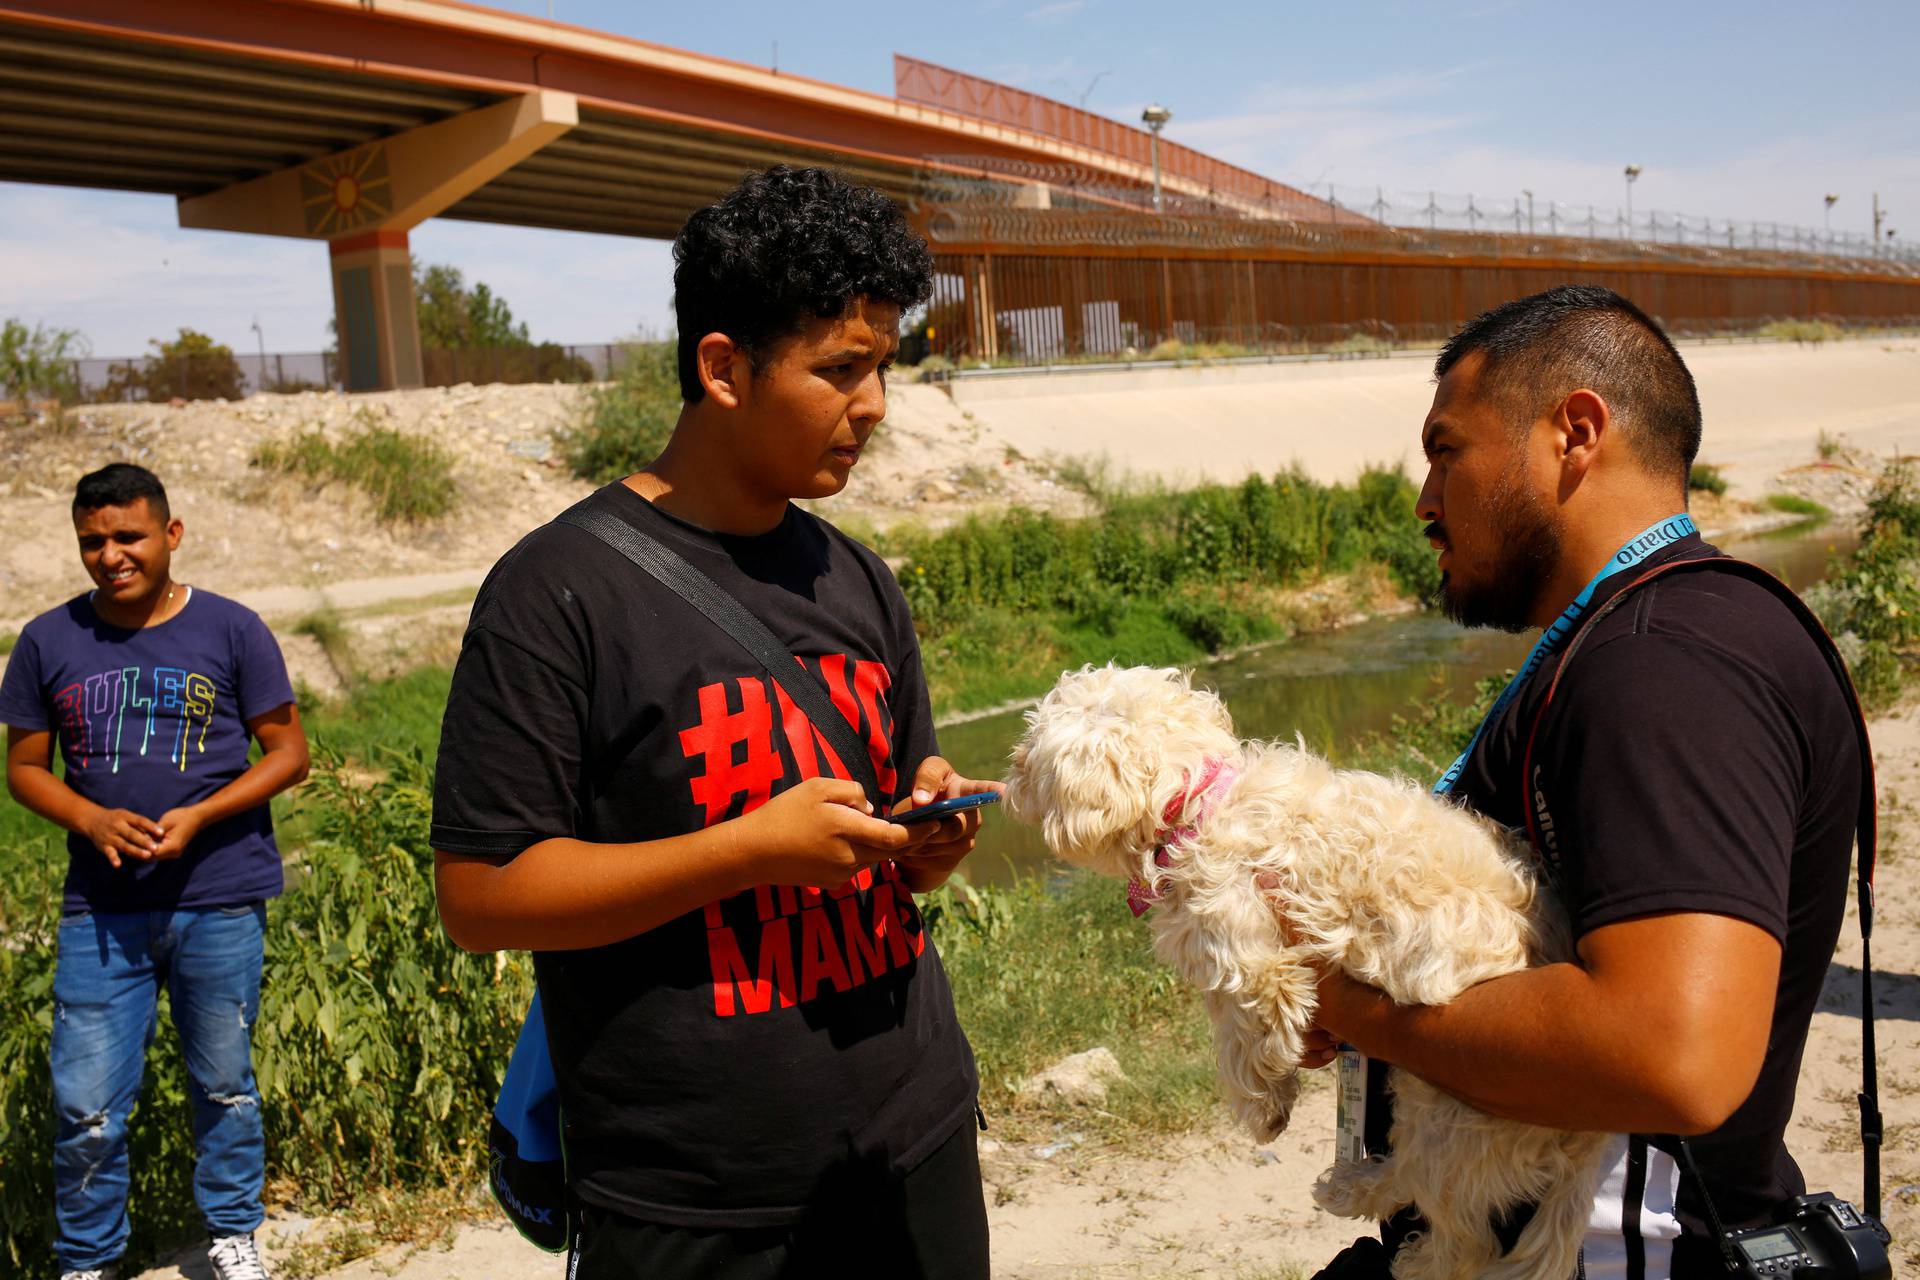 Venezuelan migrant Brayan Pinto returns to Ciudad Juarez to drop off his dog after crossing the Rio Bravo river and turning himself in to the U.S. Border Patrol in order to request asylum